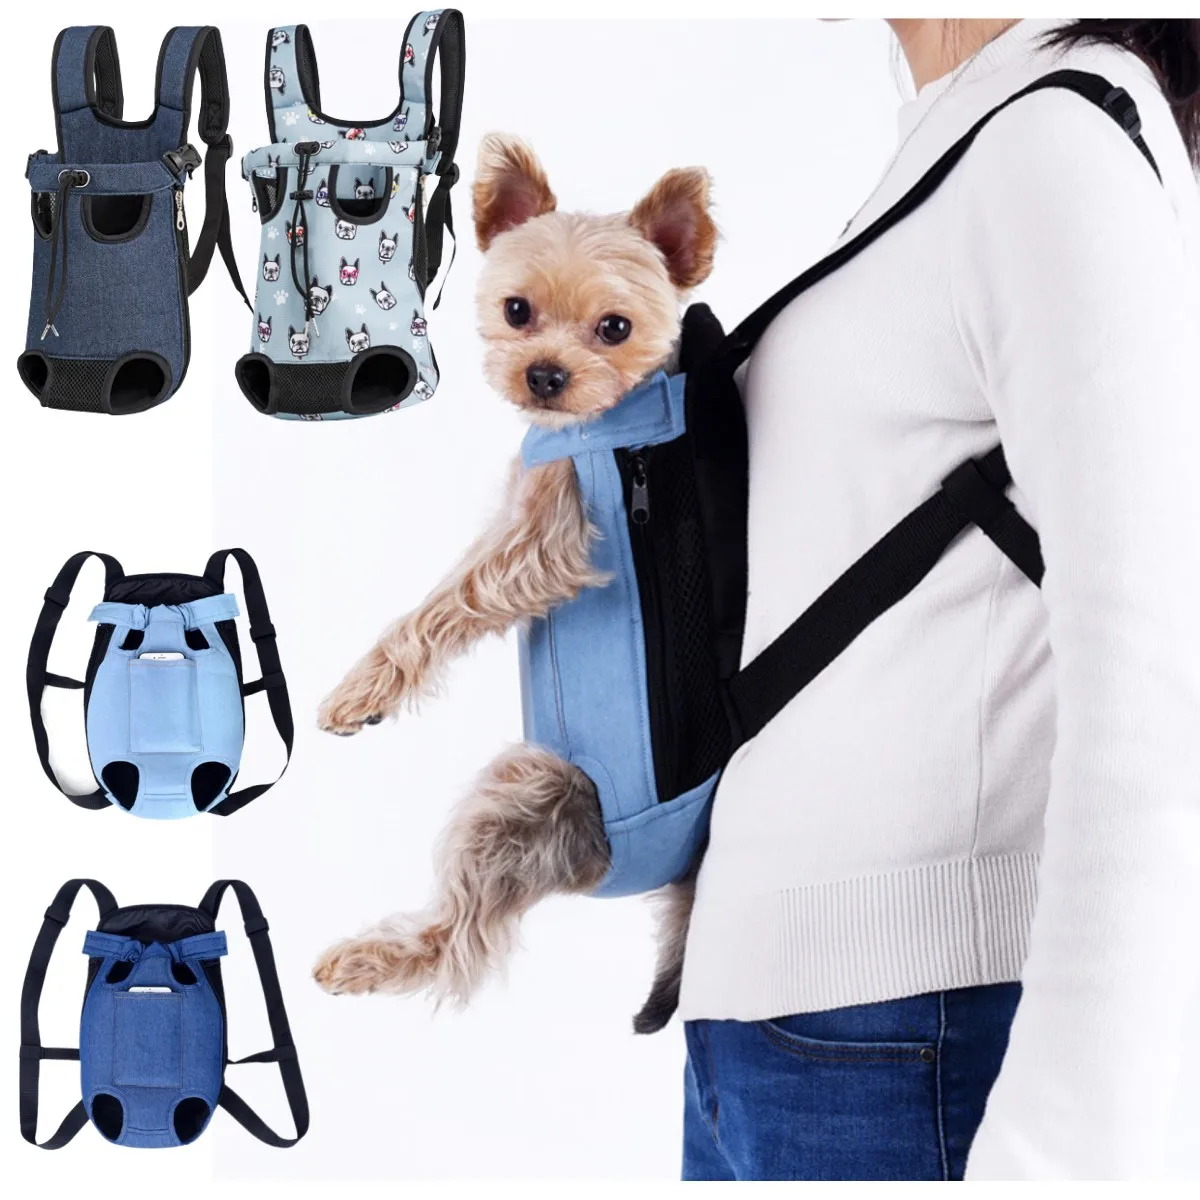 

Denim Bag Mesh Small Backpack Dog Cats Carriers Carrying Pets For Puppy Breathable Dogs Outdoor Bags Carrier Portable Bag Travel